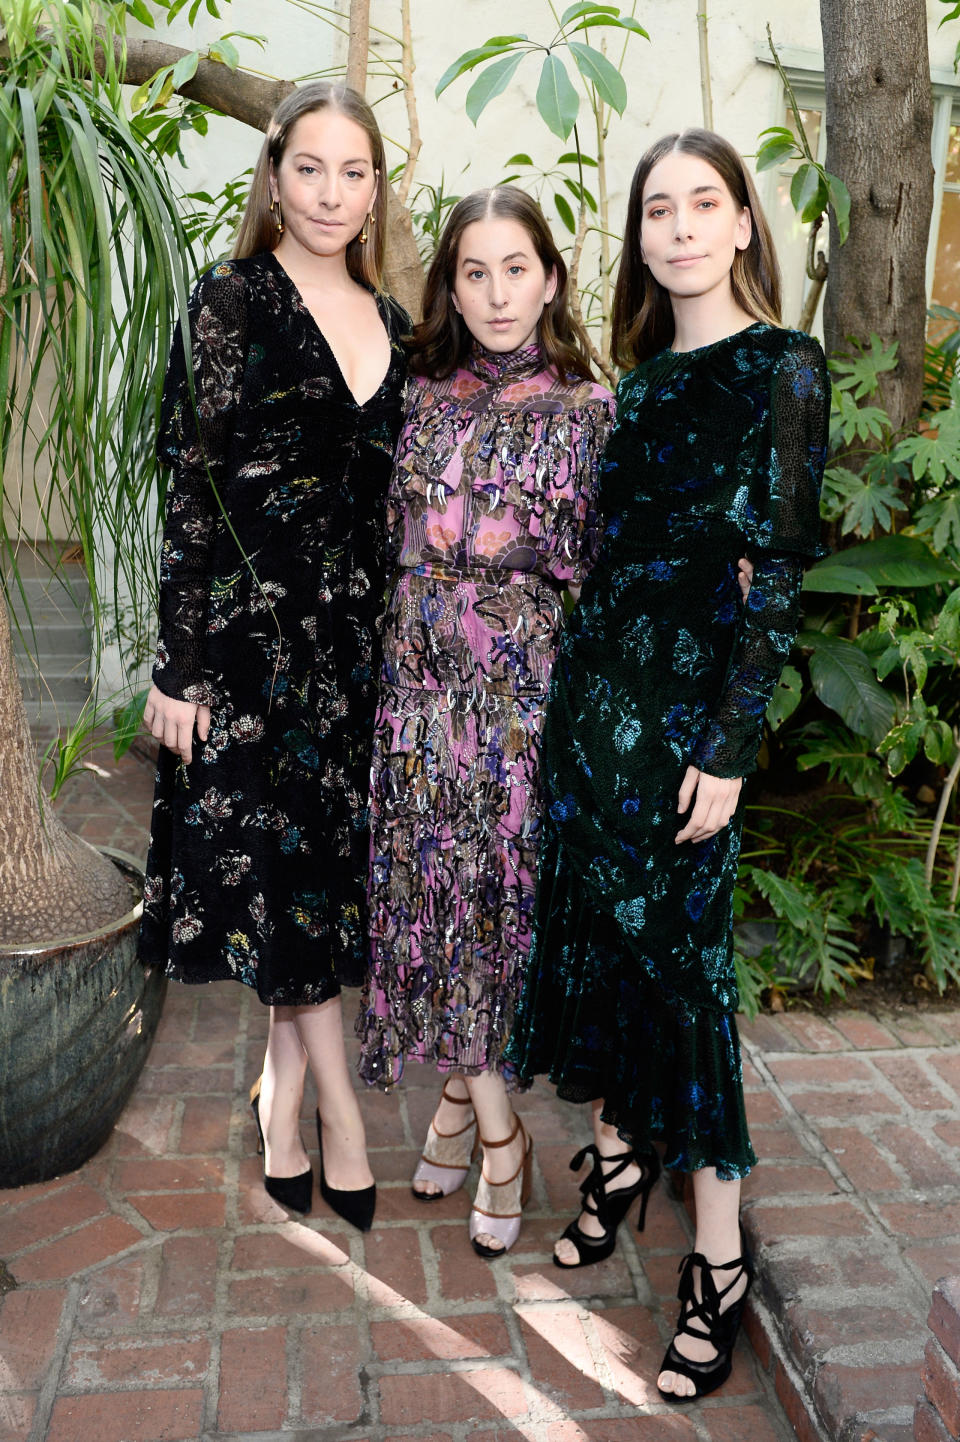 <p>Este and Alana in Rodarte and Danielle Haim in Prabal Gurung at the Vogue Fashion Fund Show at the Chateau Marmont, October 2017.</p>